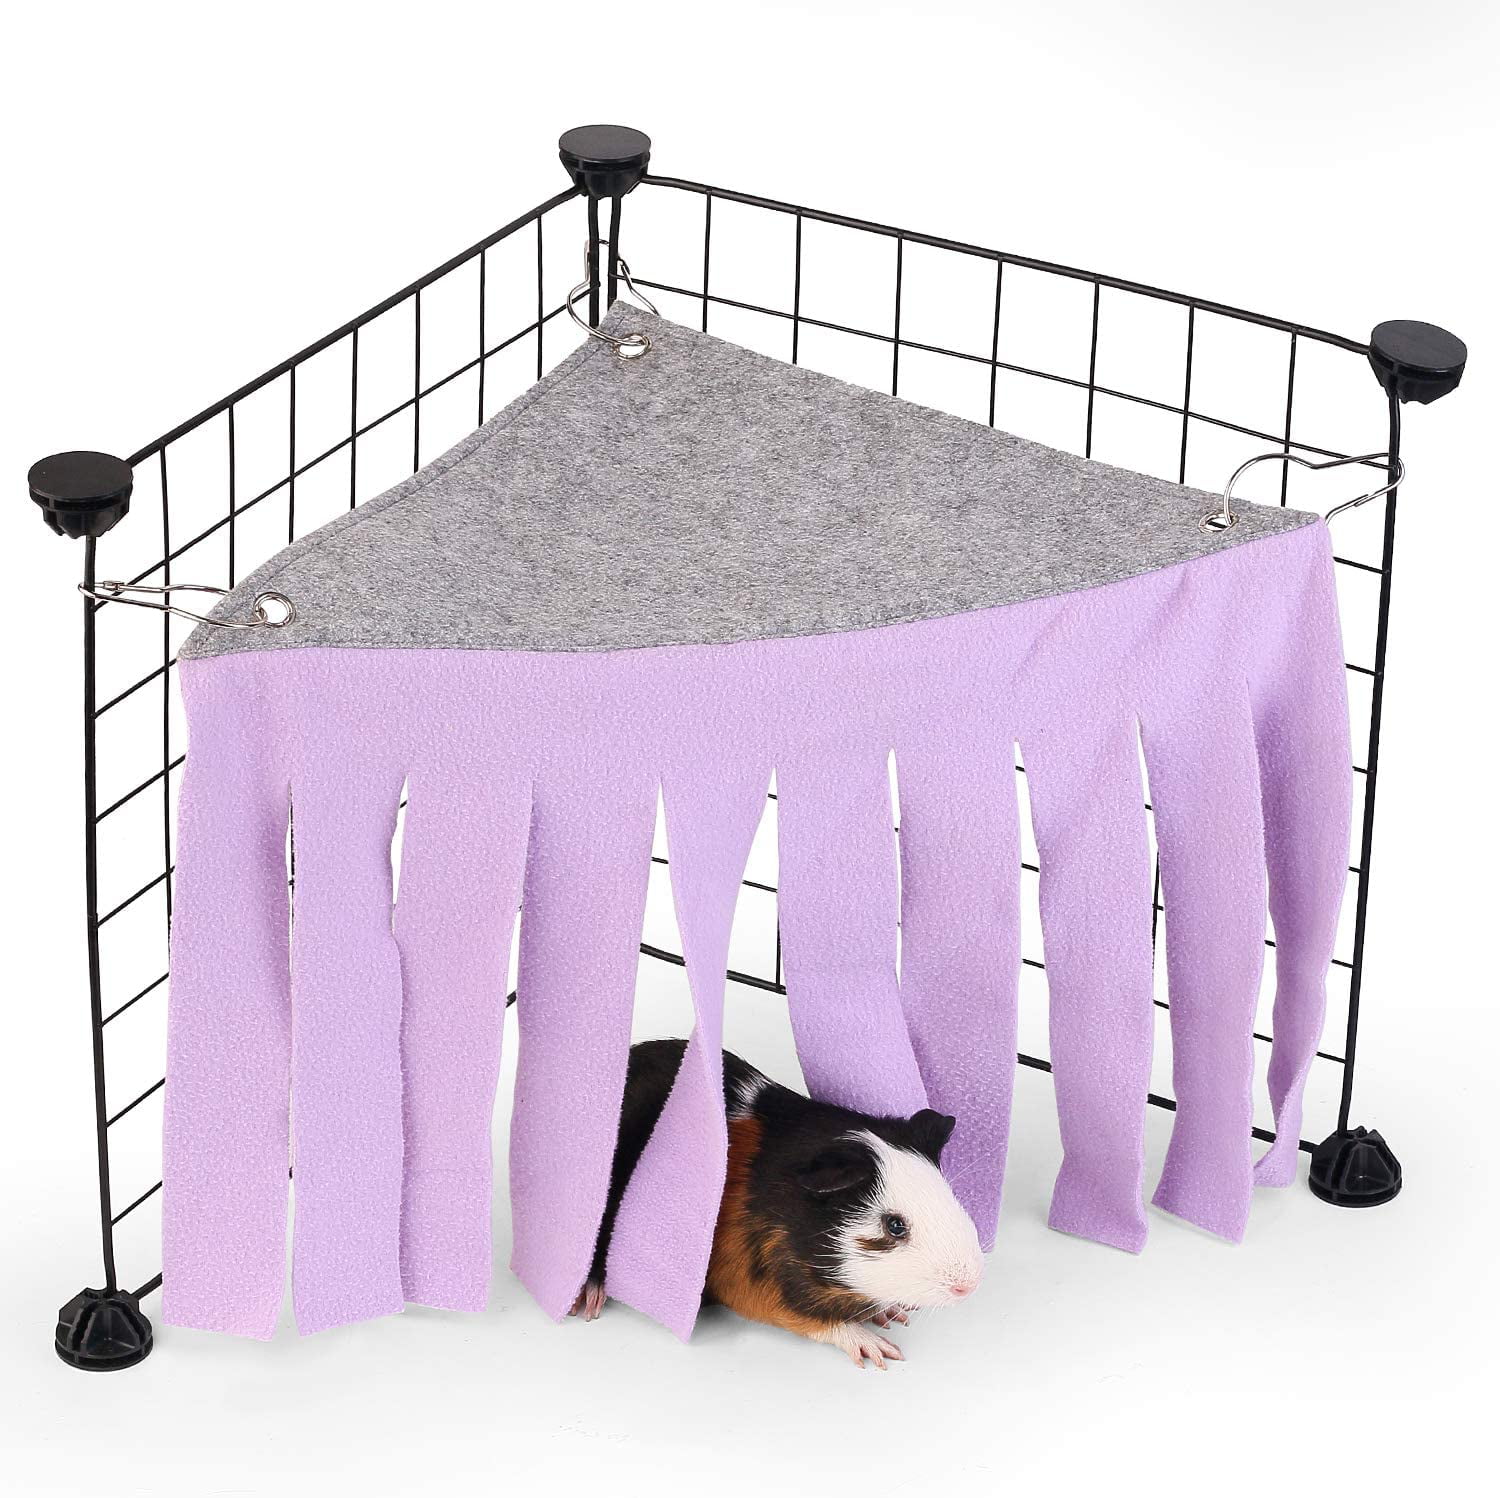 SOLD OUT Guinea pig small animals tunnel accessories bed hideout set fleece forest